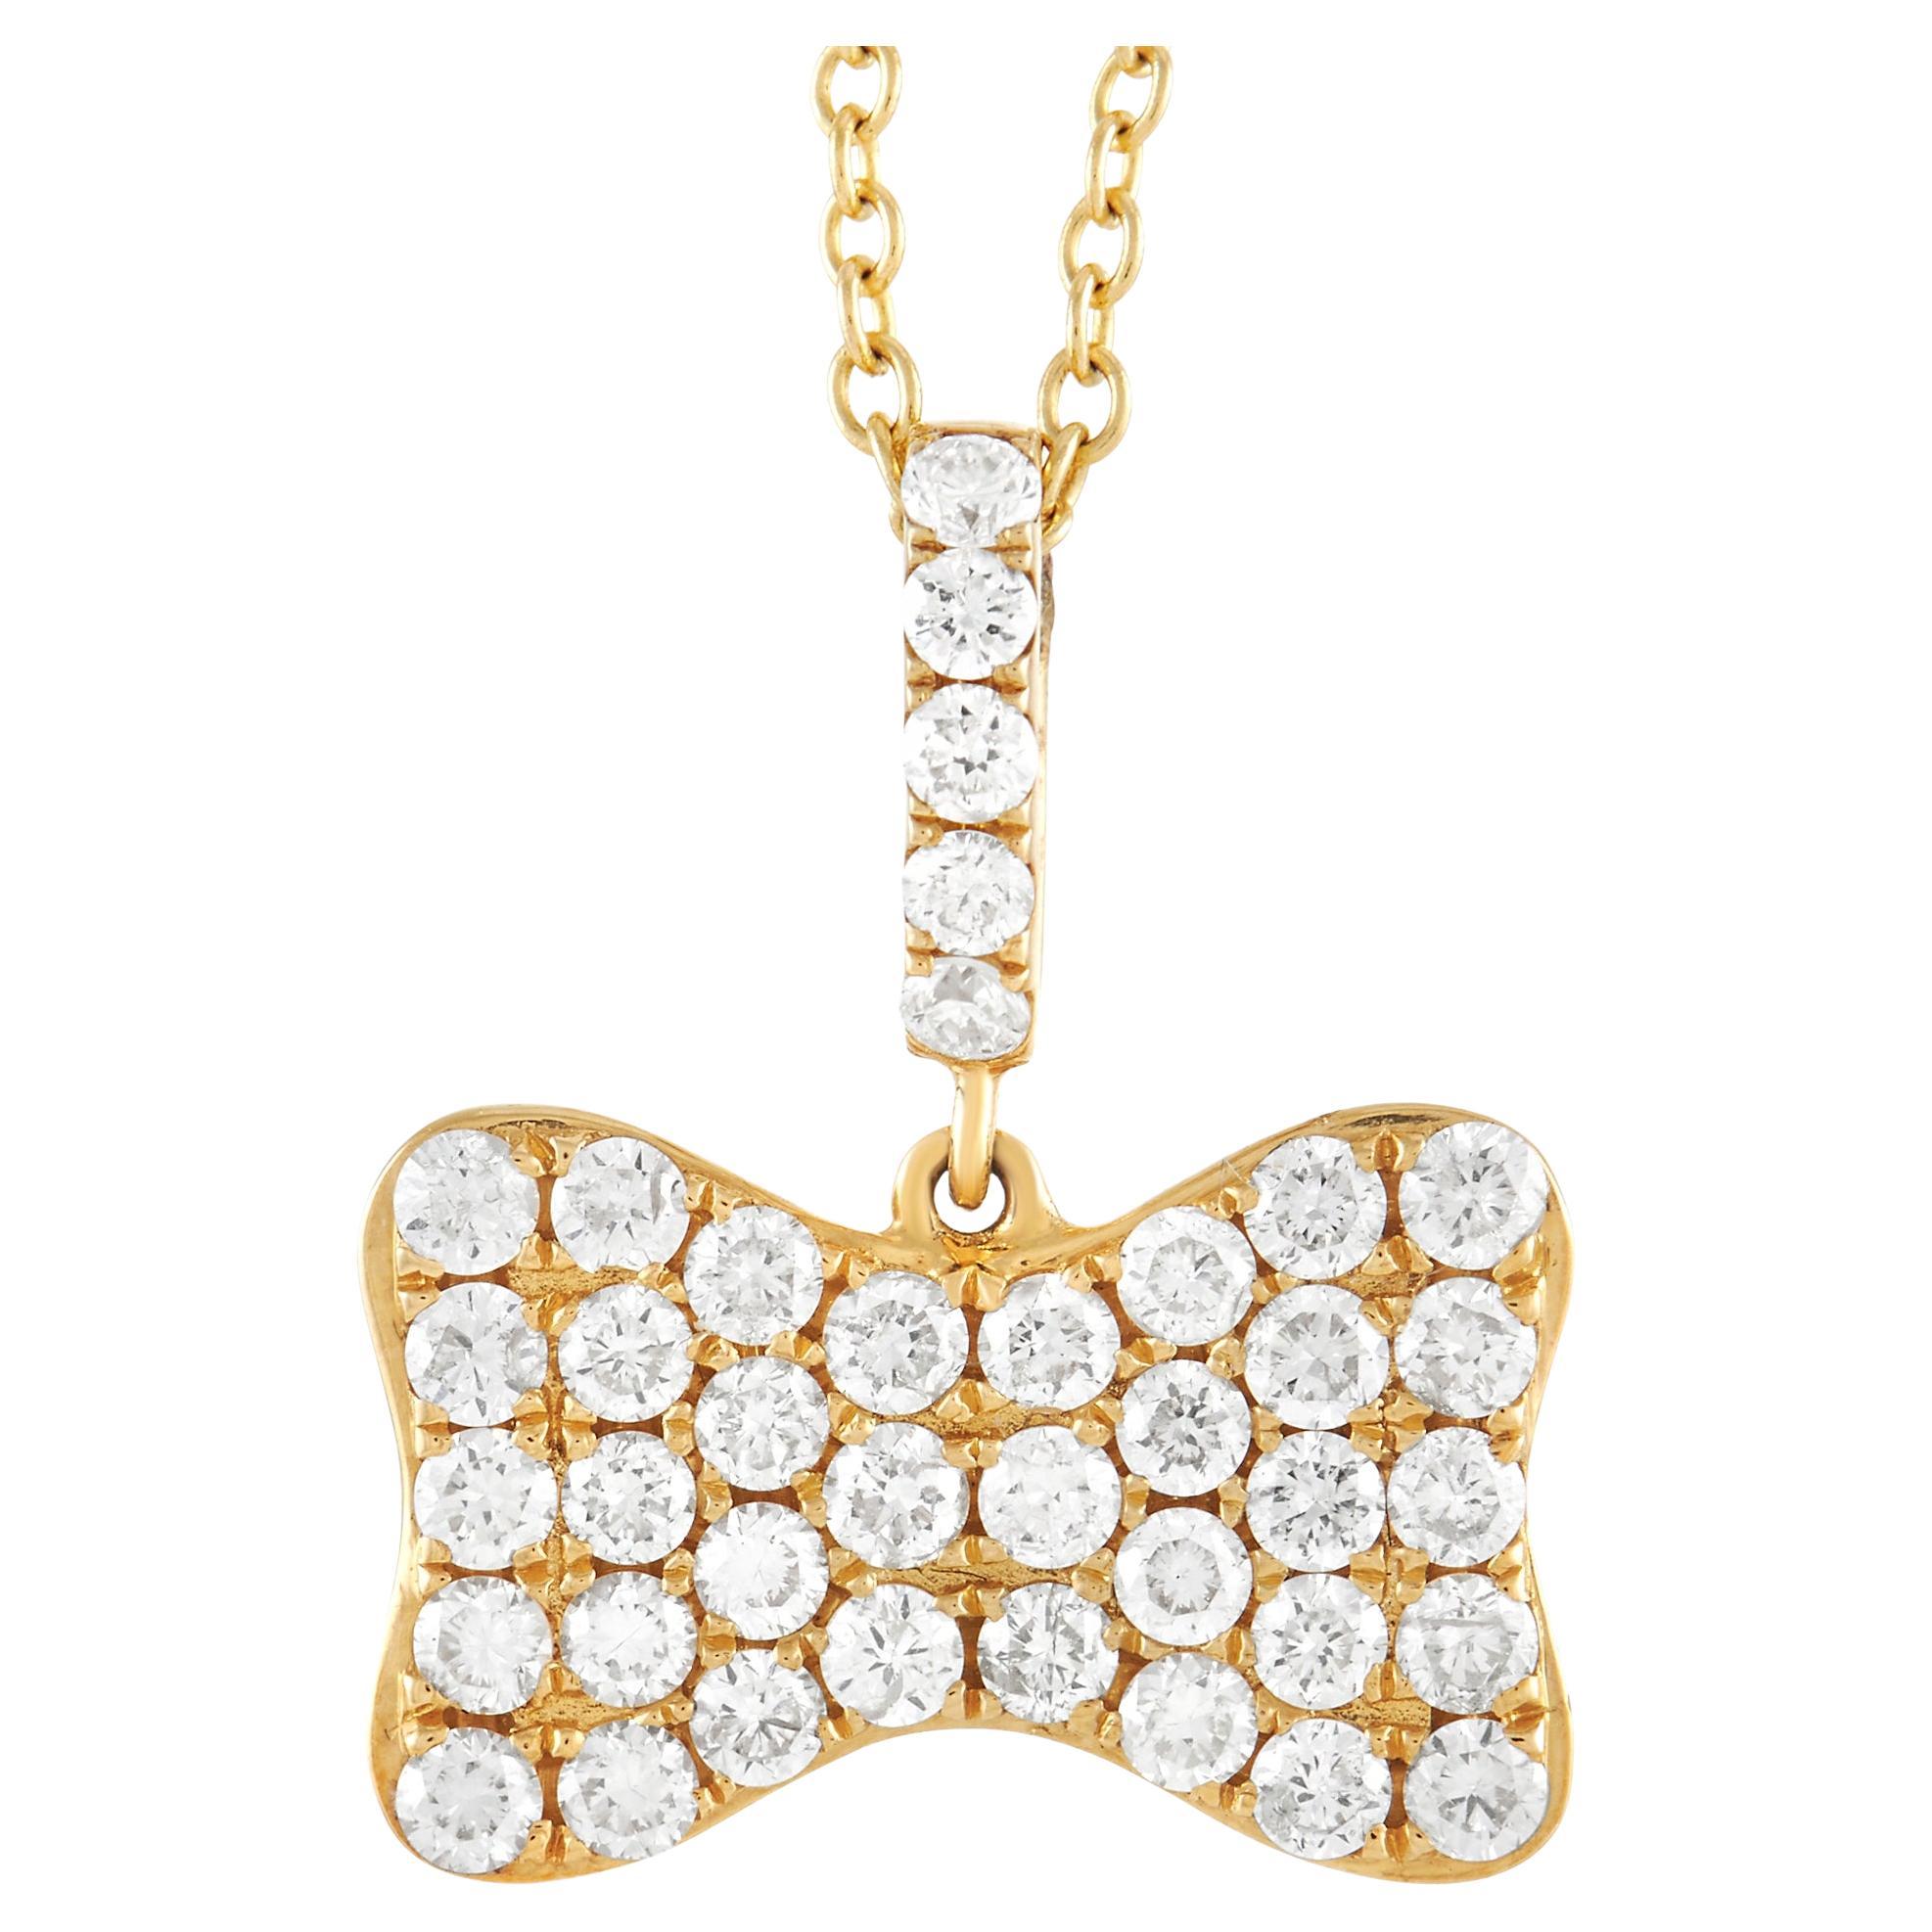 LB Exclusive 18K Yellow Gold 0.80 ct Pave Diamond Bow Pendant Necklace For Sale